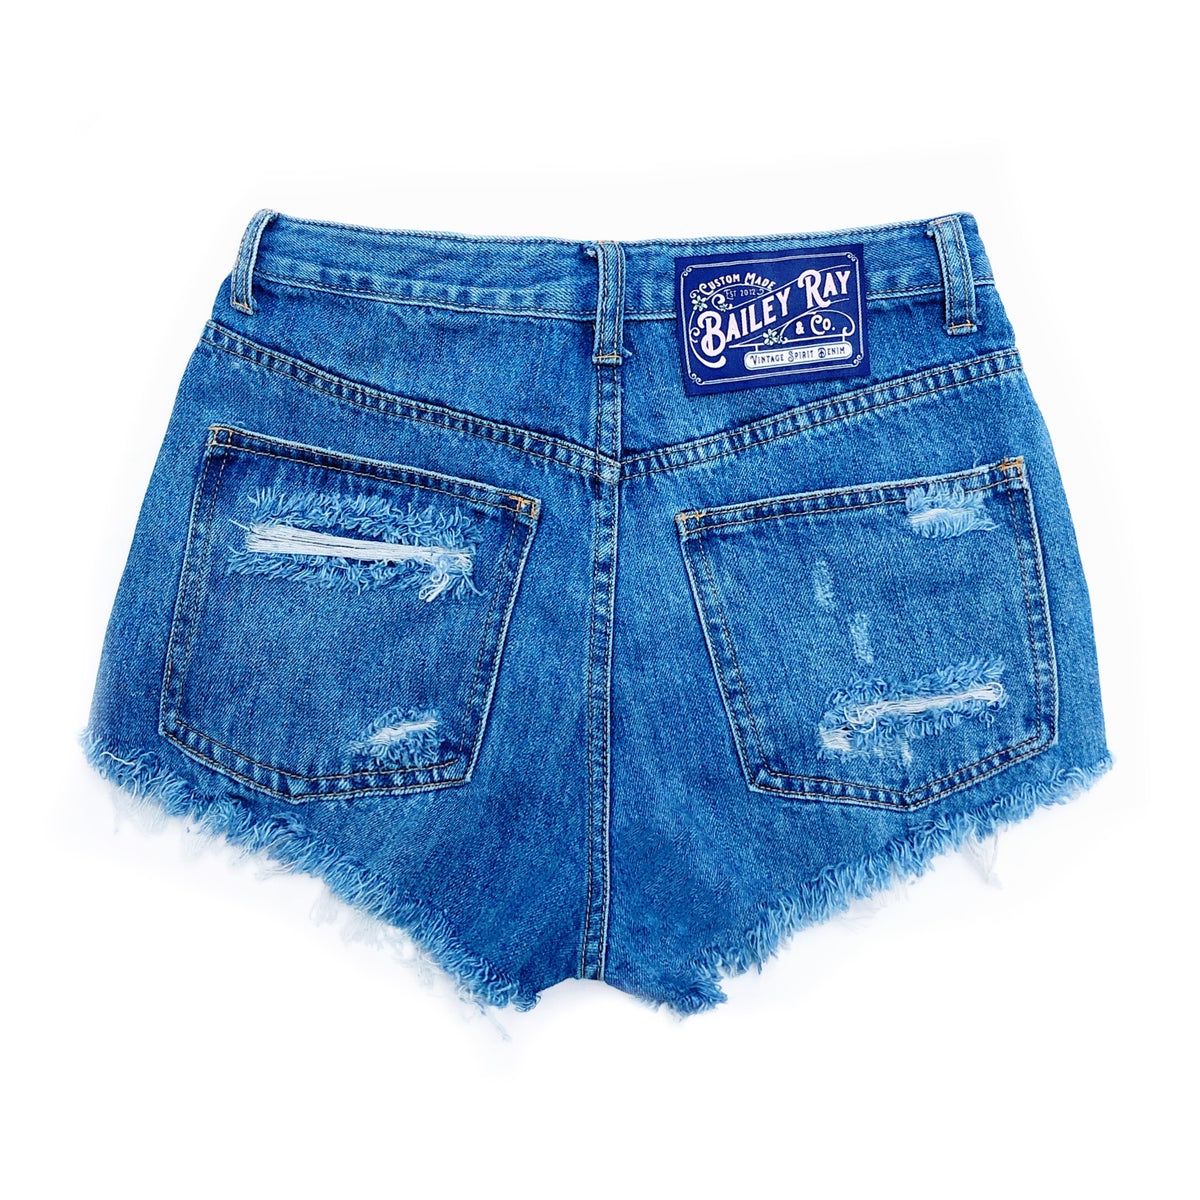 Bailey Ray and Co - Distressed High Waisted Denim Shorts - The ...